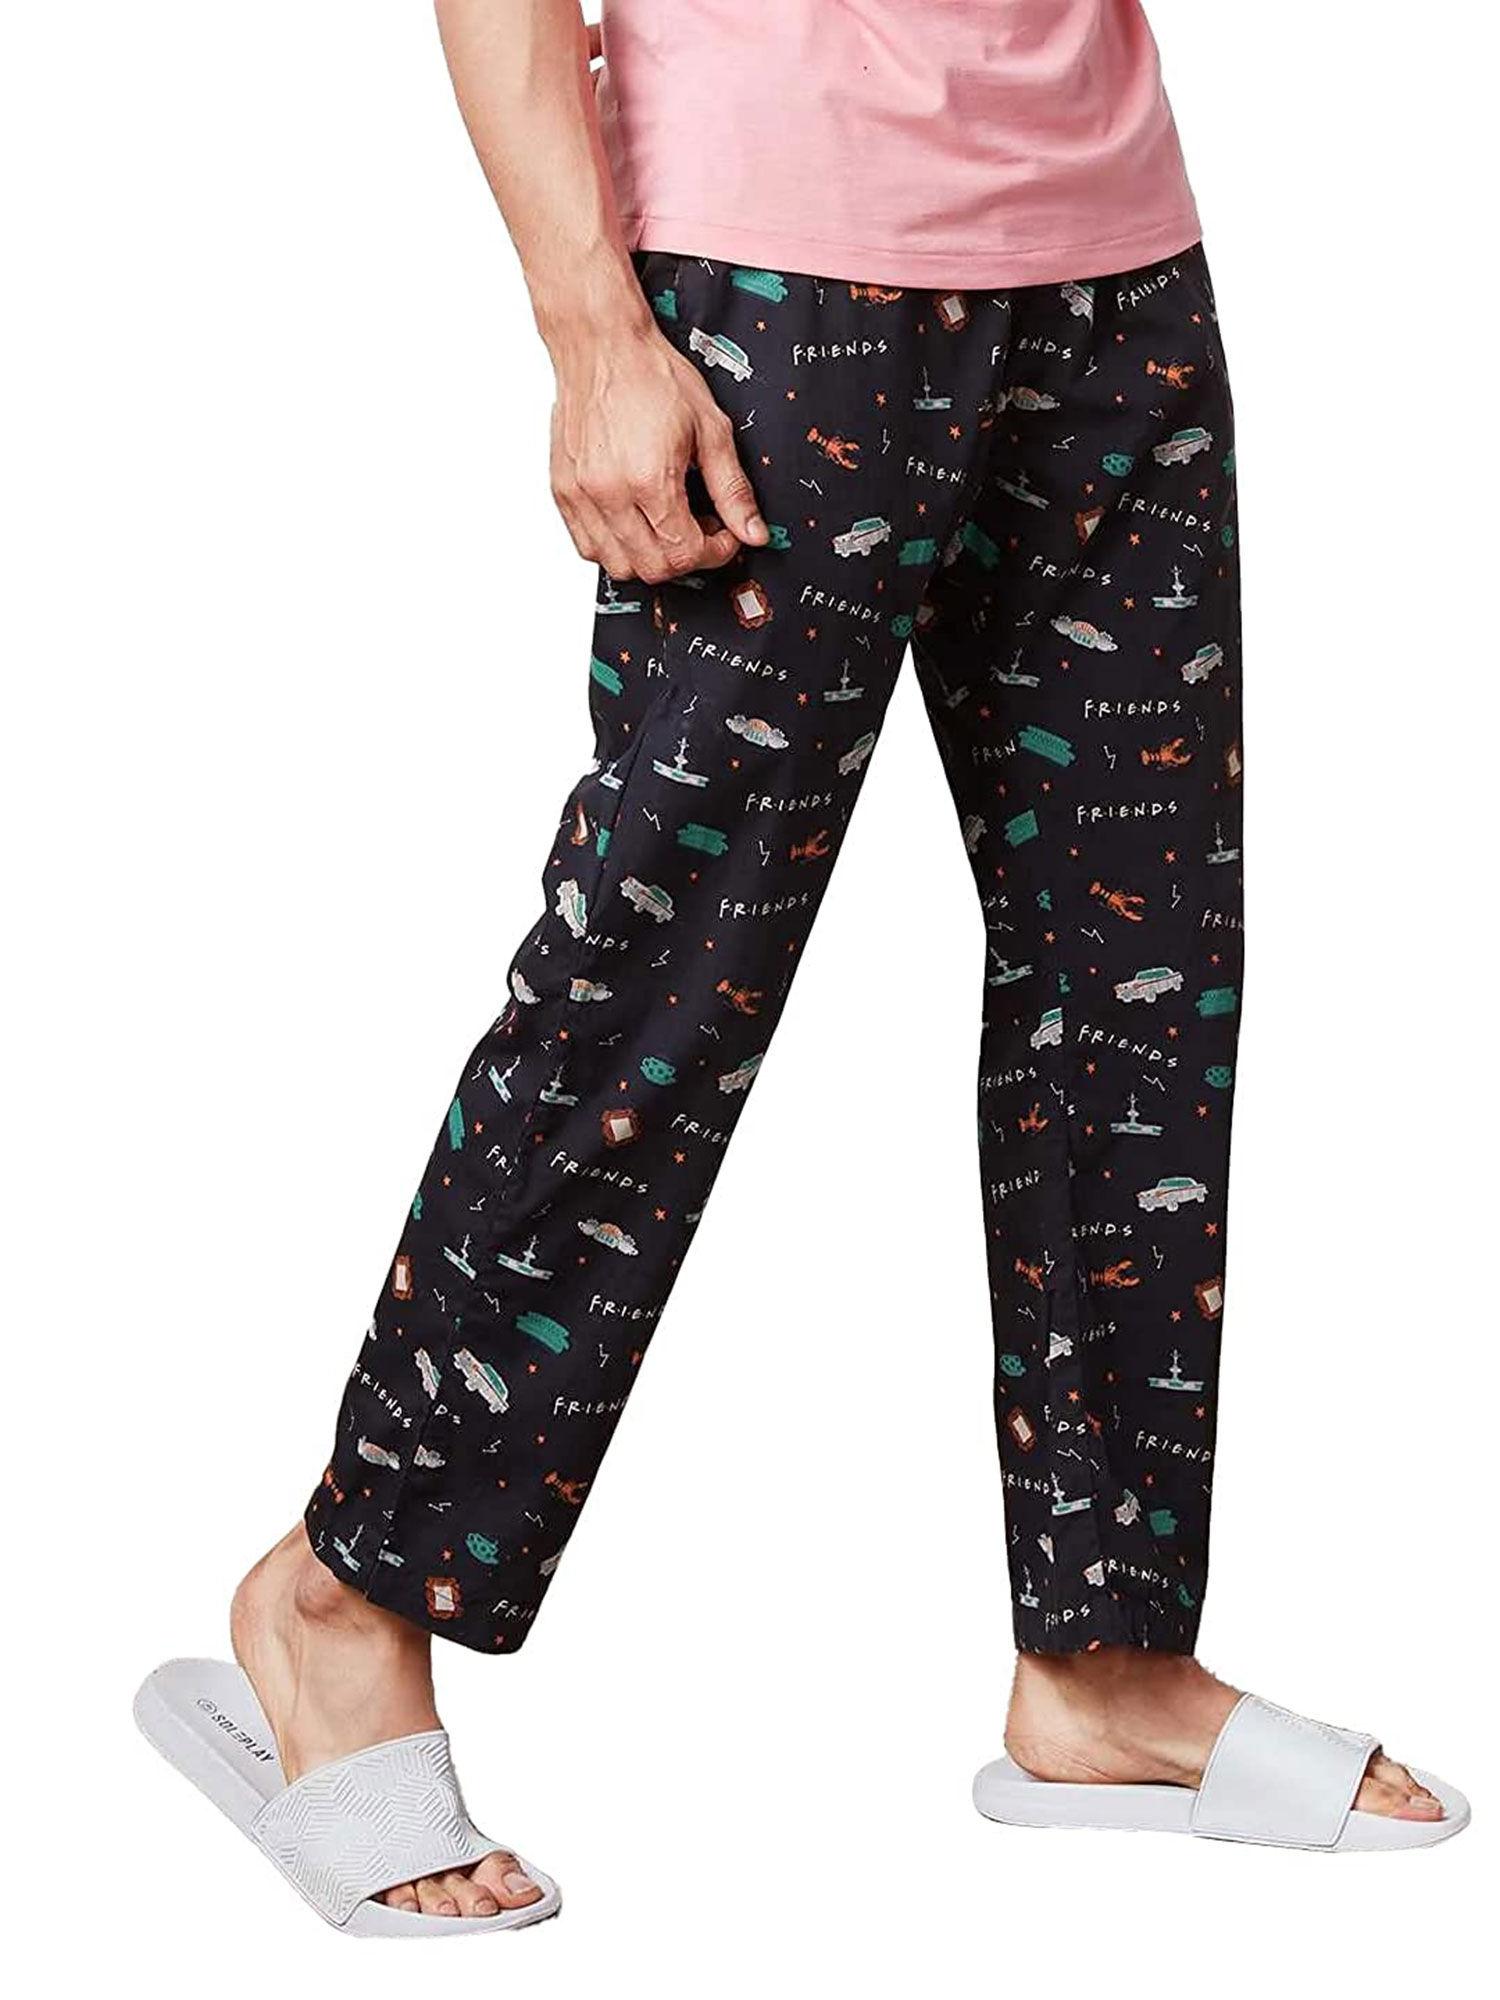 official-f.r.i.e.n.d.s-pattern-pajamas-for-mens